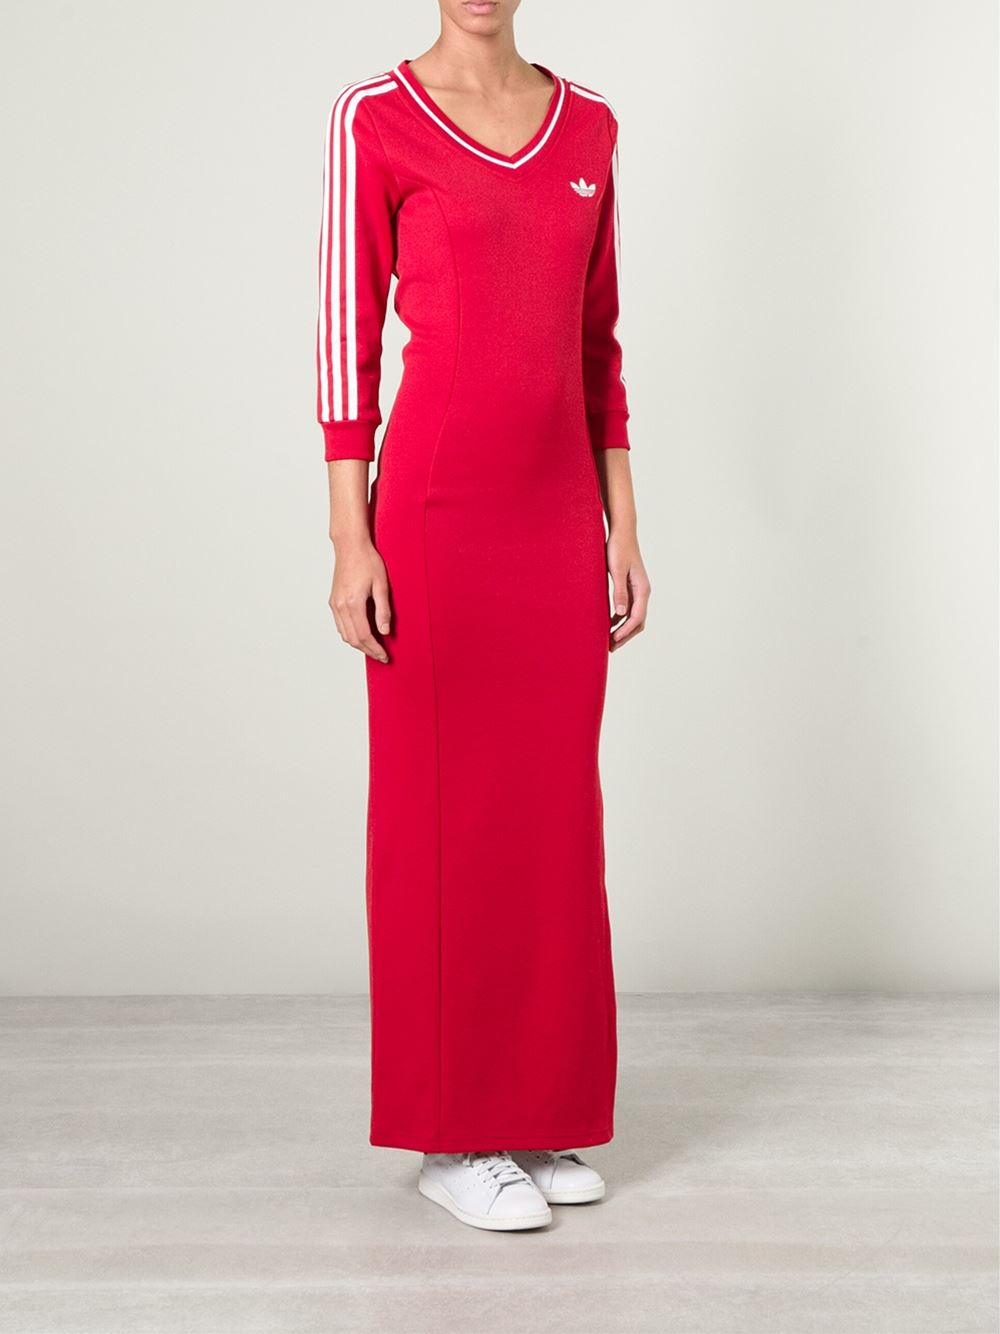 adidas Long Line Jersey Dress in Red - Lyst